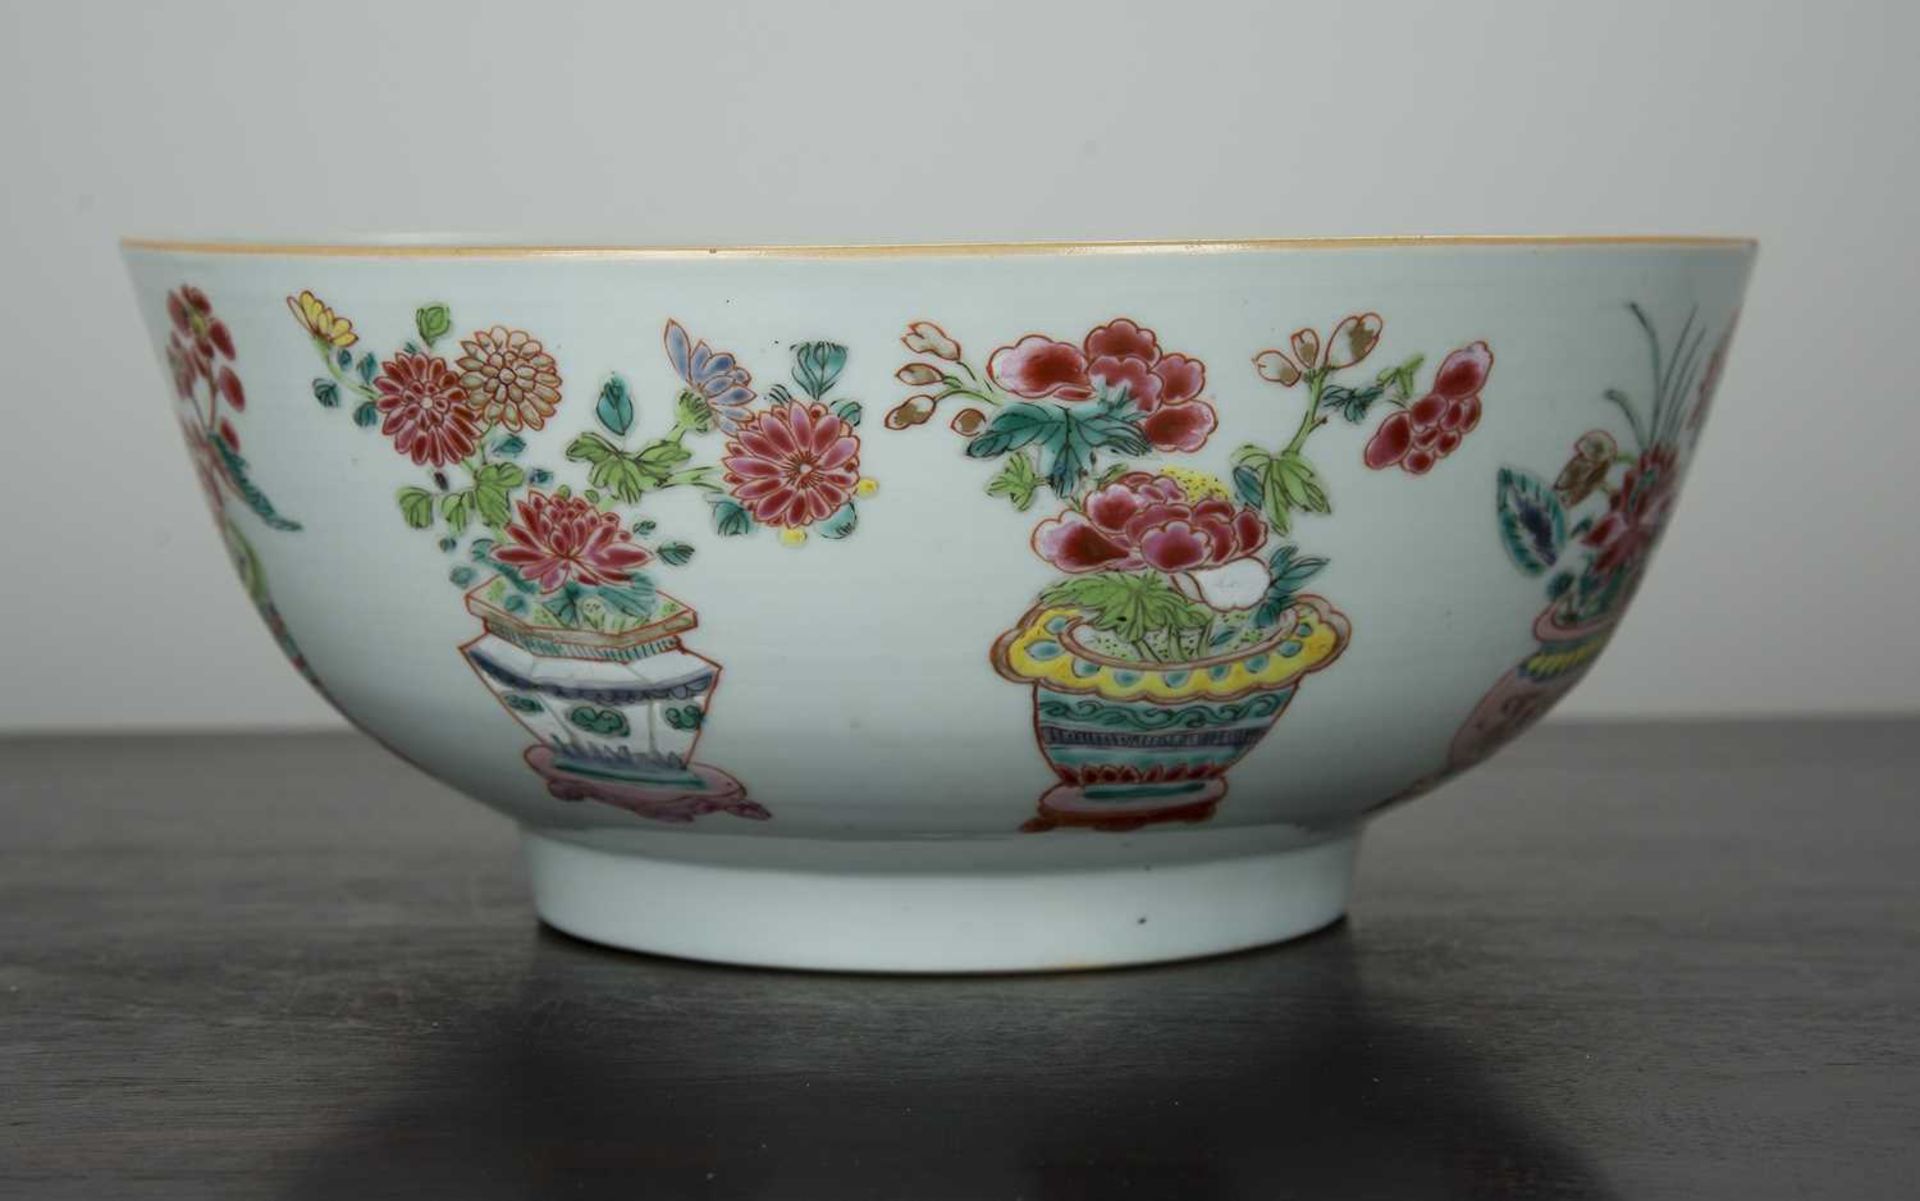 Famille rose bowl Chinese, 18th Century painted in enamels with baskets of flowers around the edge - Image 4 of 6